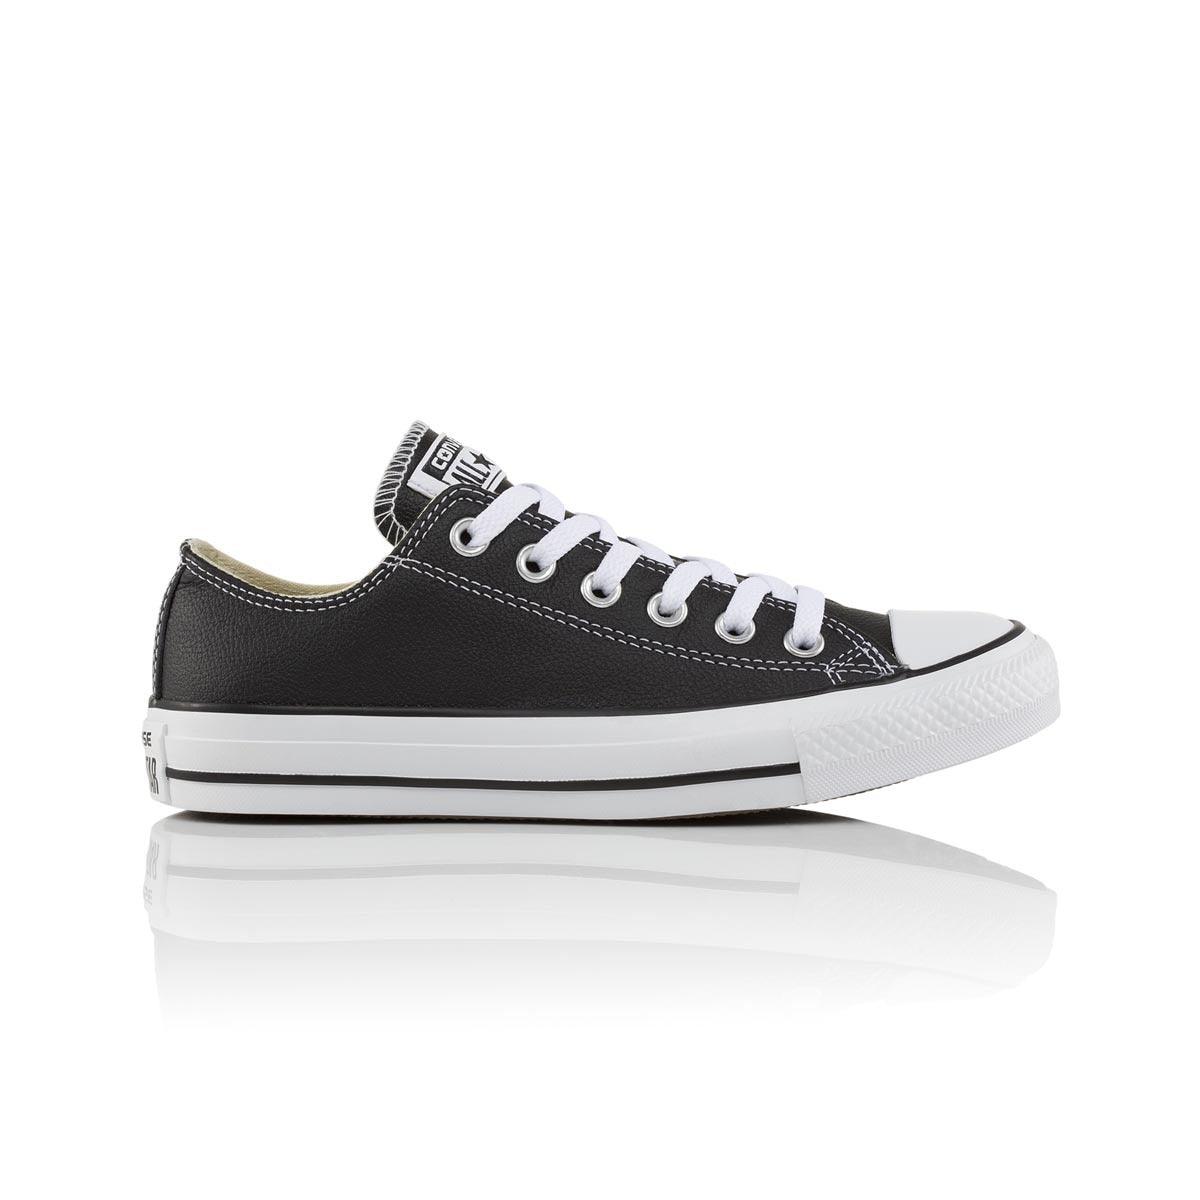 Converse Chuck Taylor All Star Low Leather - The Next Pair